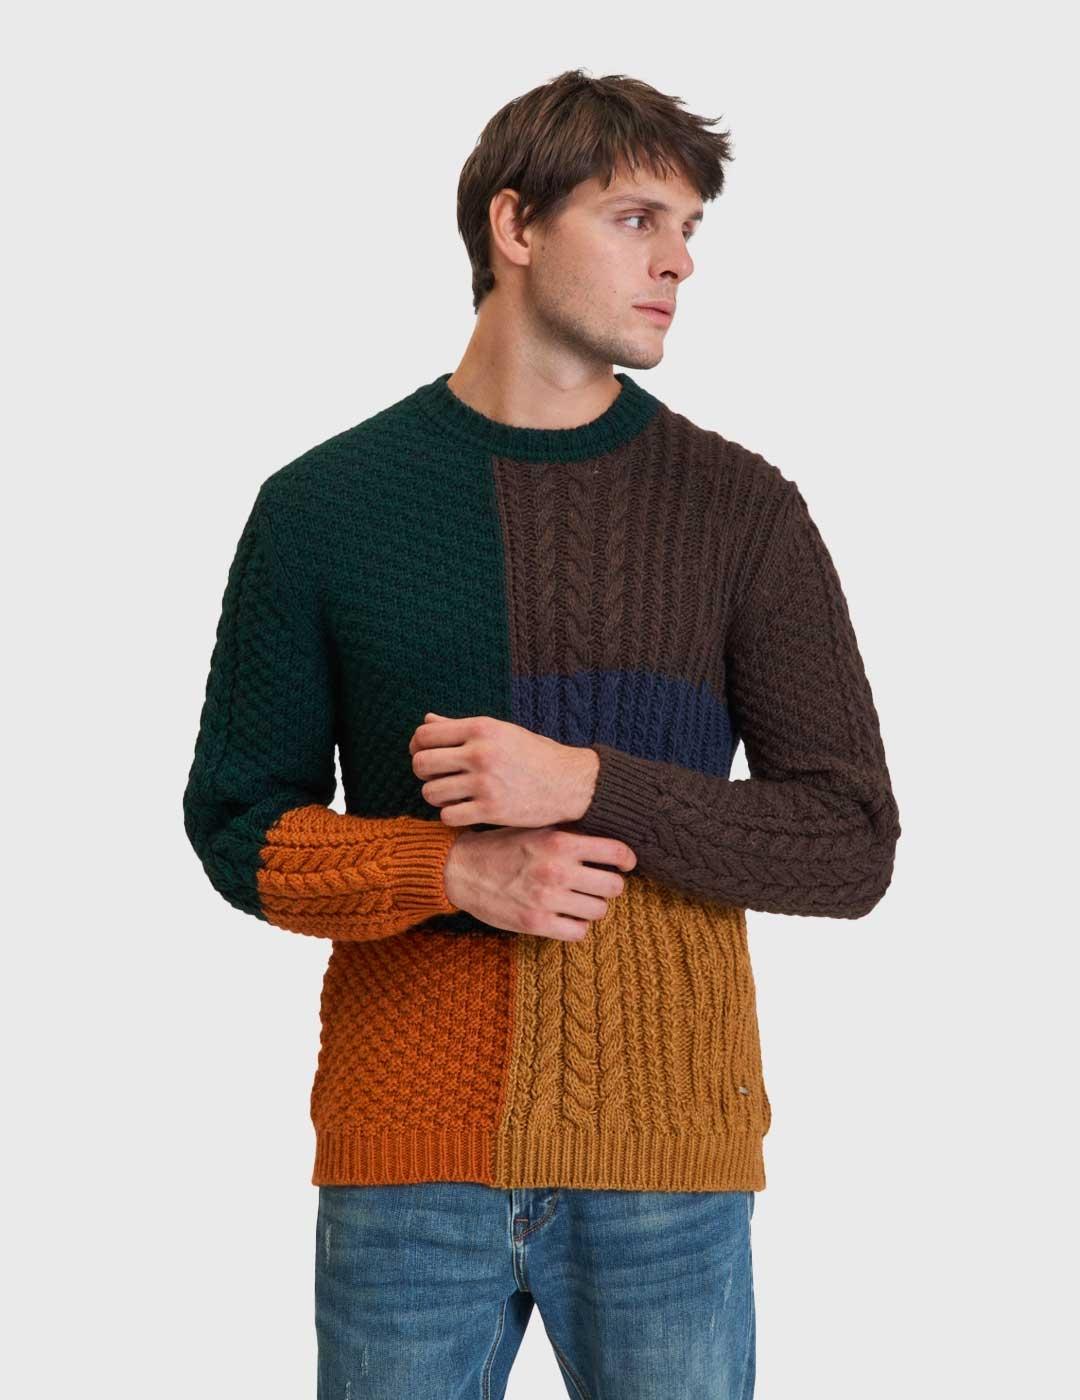 Jersey Gianni Lupo Colour Block Cable Knit multicolor